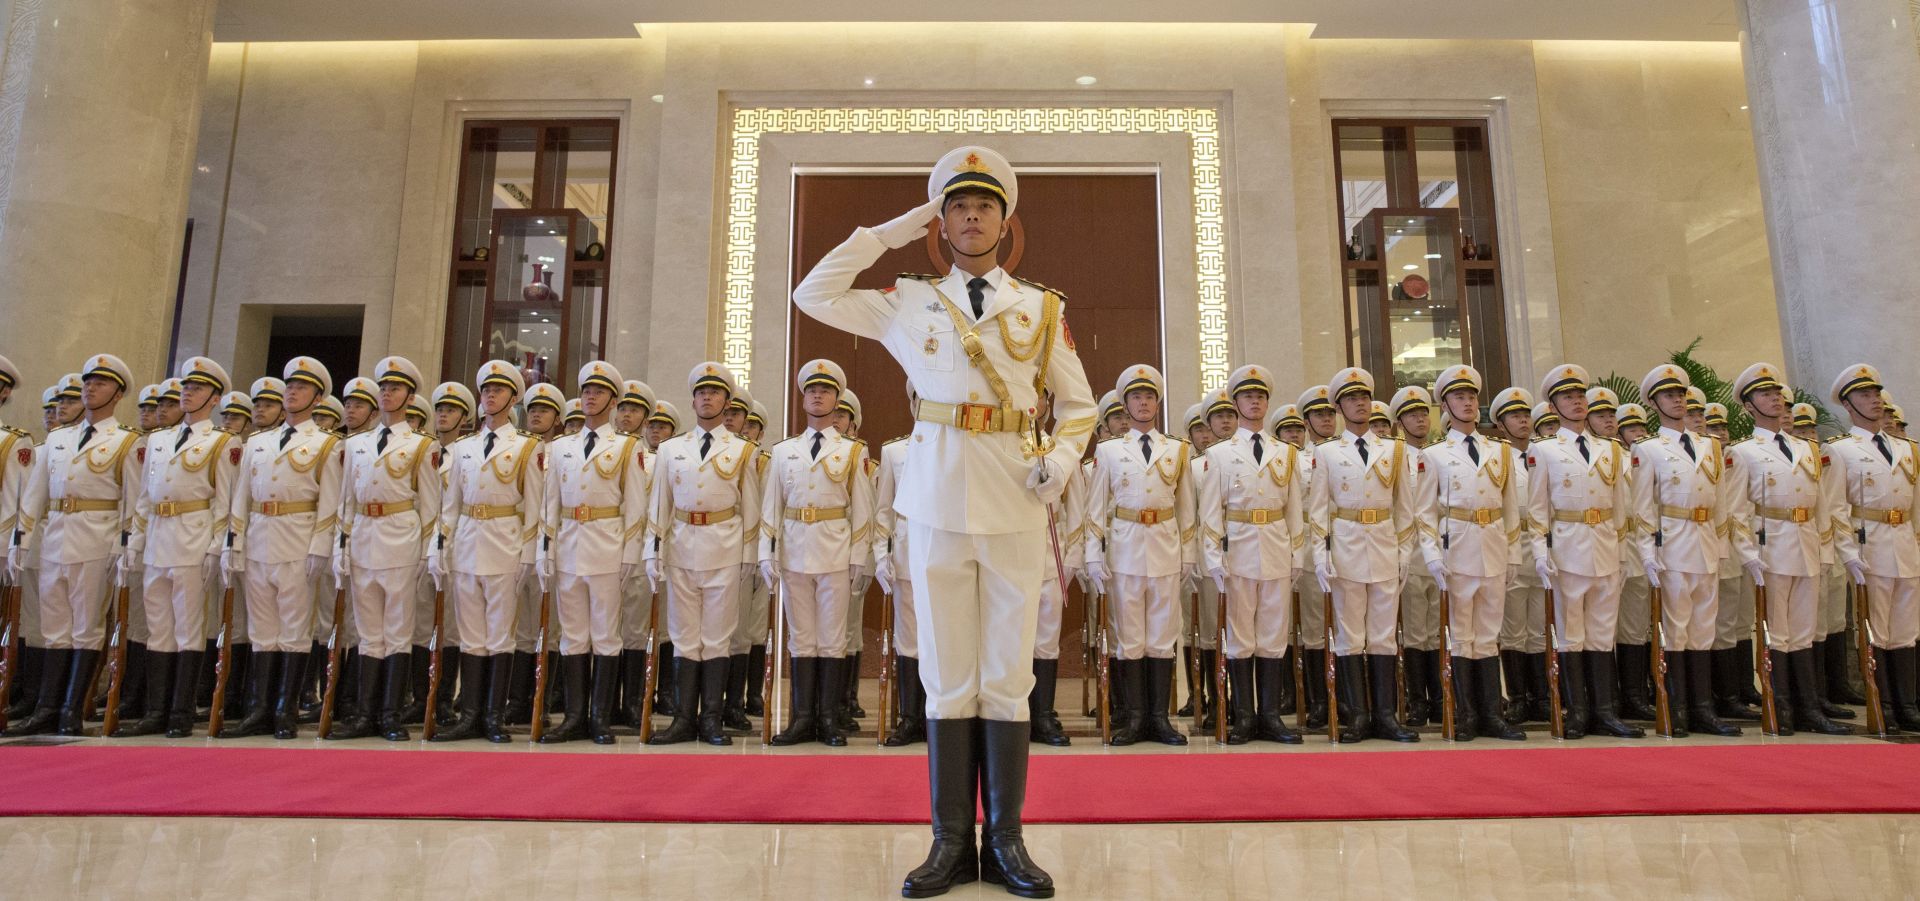 epa05430095 A navy honor guard prepares for a welcome ceremony for US Chief of Naval Operations Adm. John Richardson (not pictured), at the Chinese Navy Headquarters in Beijing, China, 18 July 2016. Richardson is on a three-day official visit to China and will discuss bilateral militaries ties and the South China Sea with his Chinese counterparts.  EPA/NG HAN GUAN  / POOL